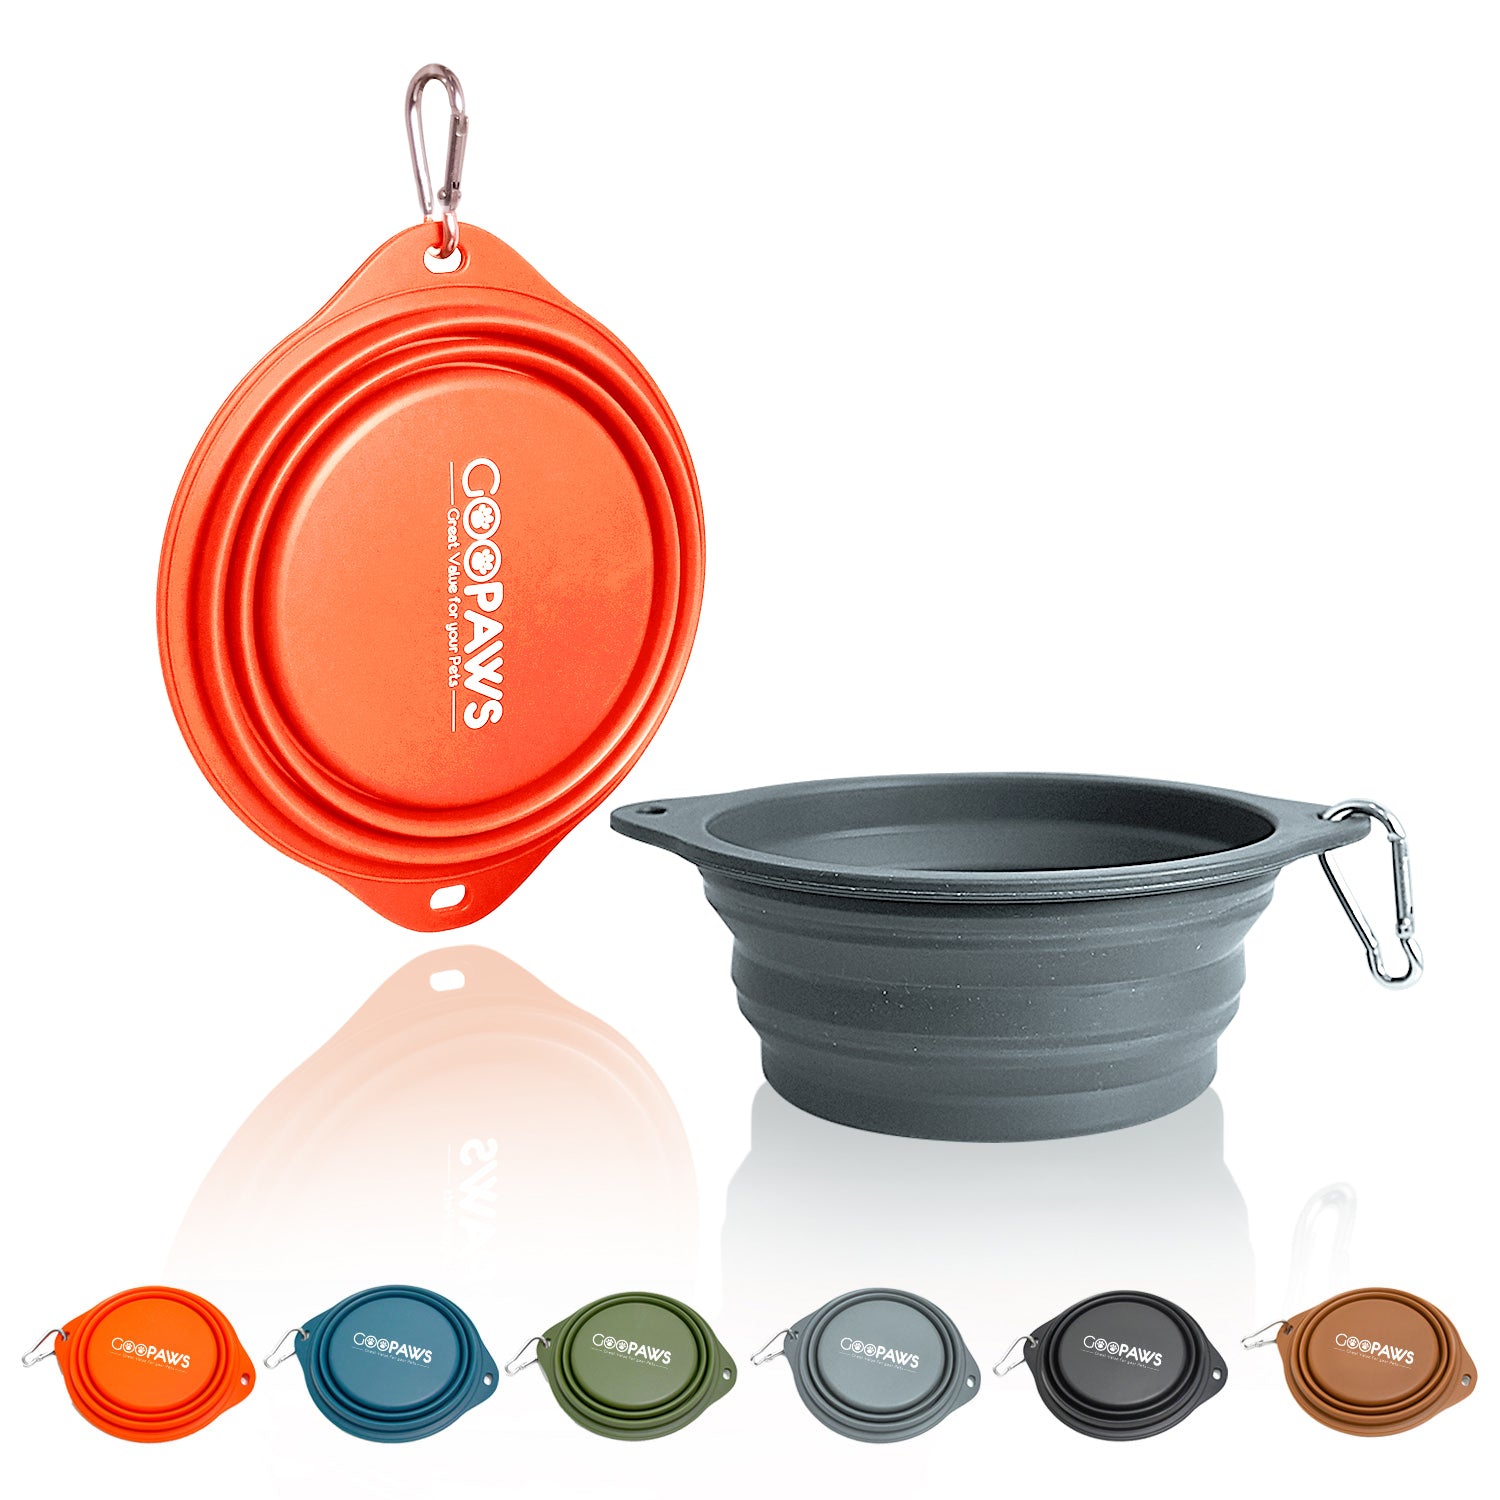 GOOPAWS 2 Pack Silicone Non-Skid Travel Dog and Cat Bowl, Orange&Grey